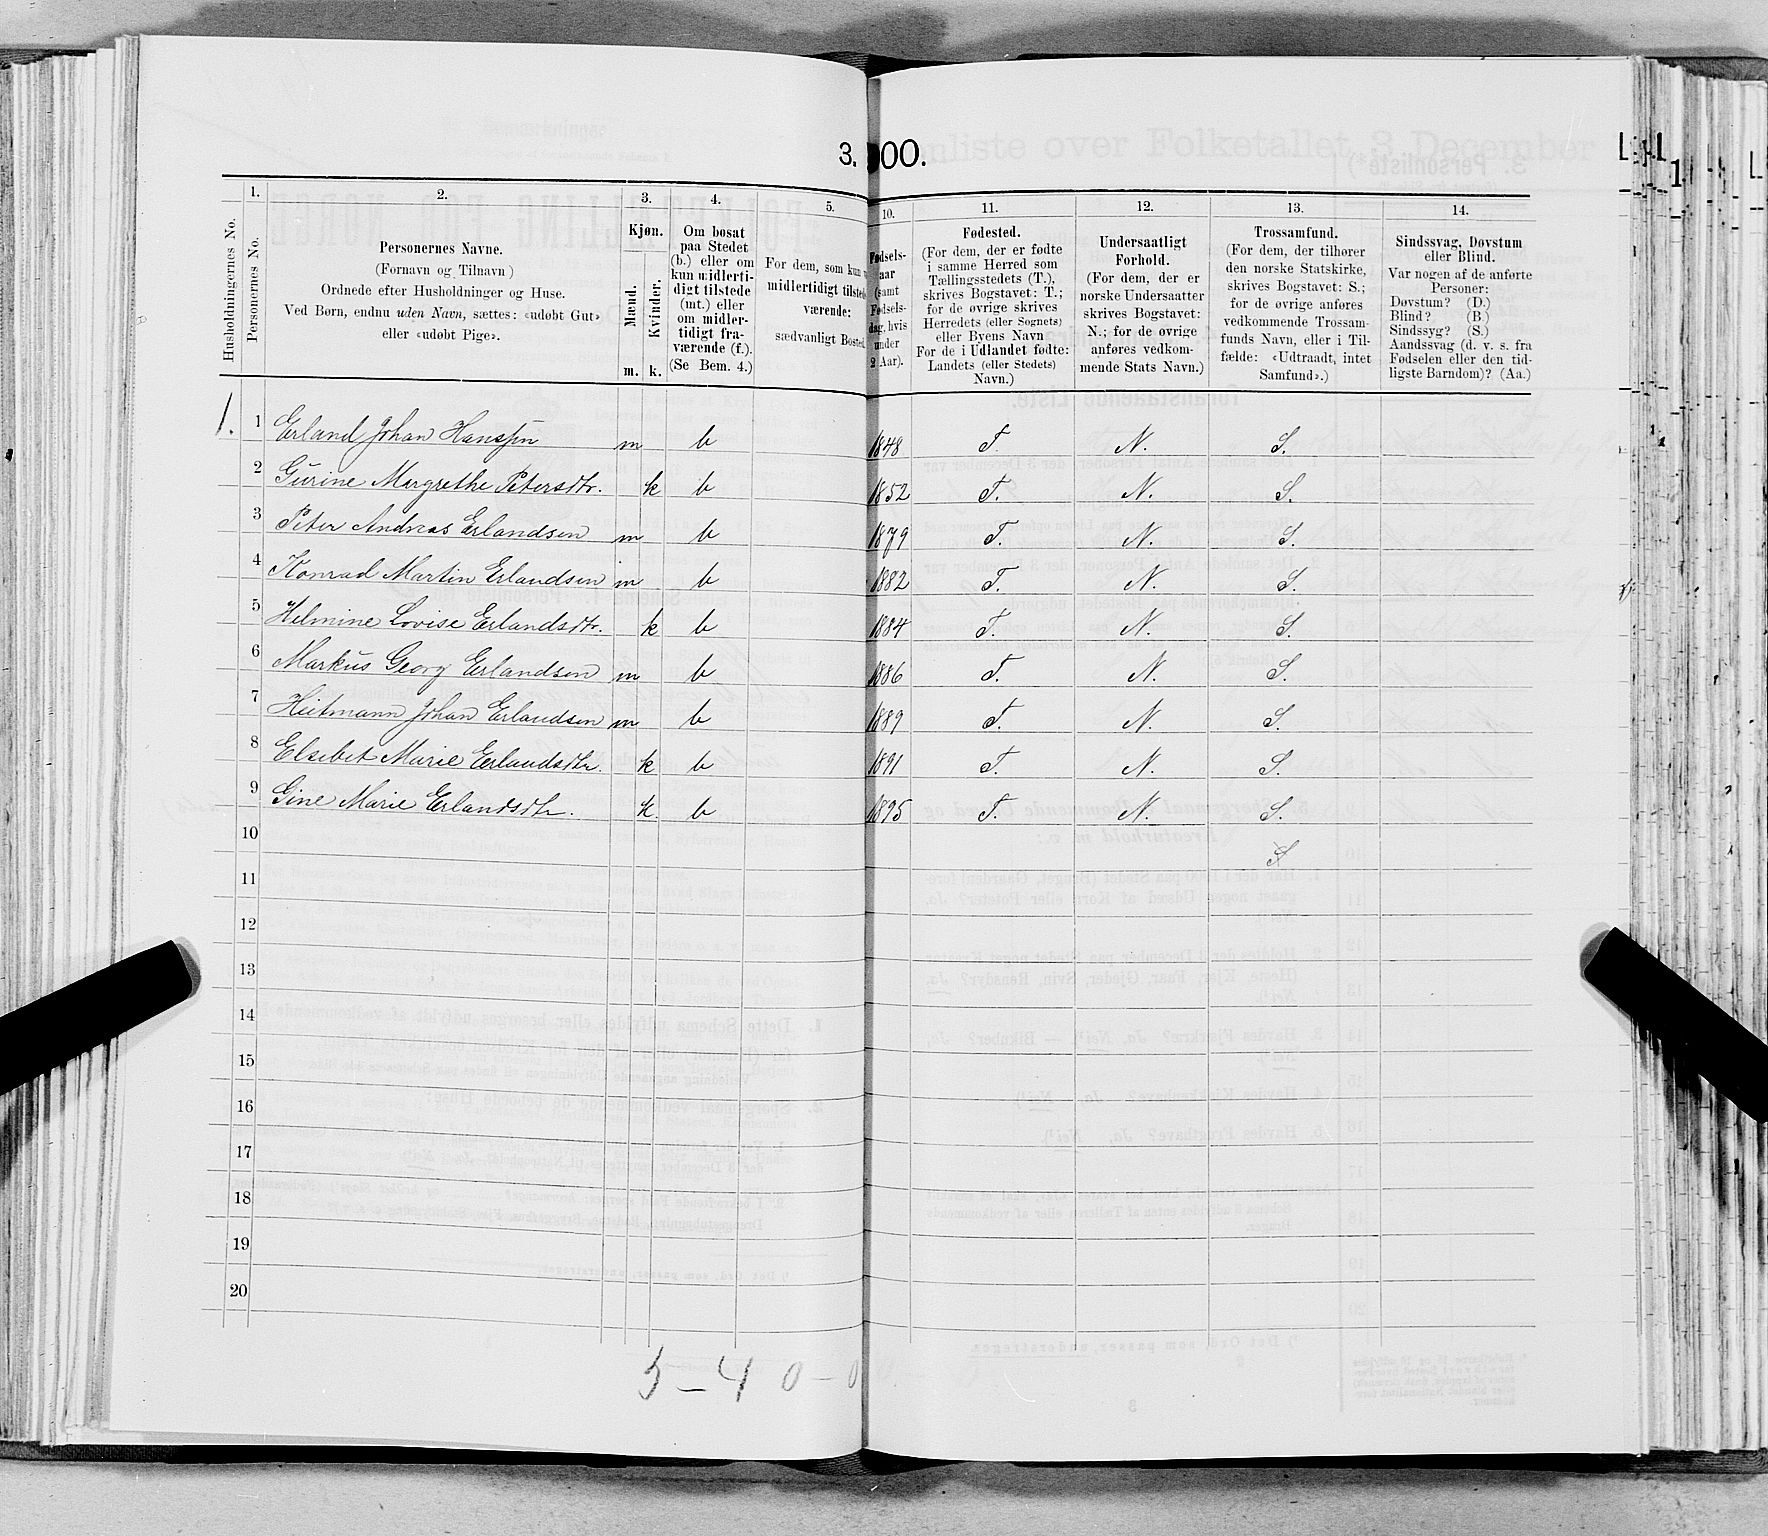 SAT, 1900 census for Mo, 1900, p. 183